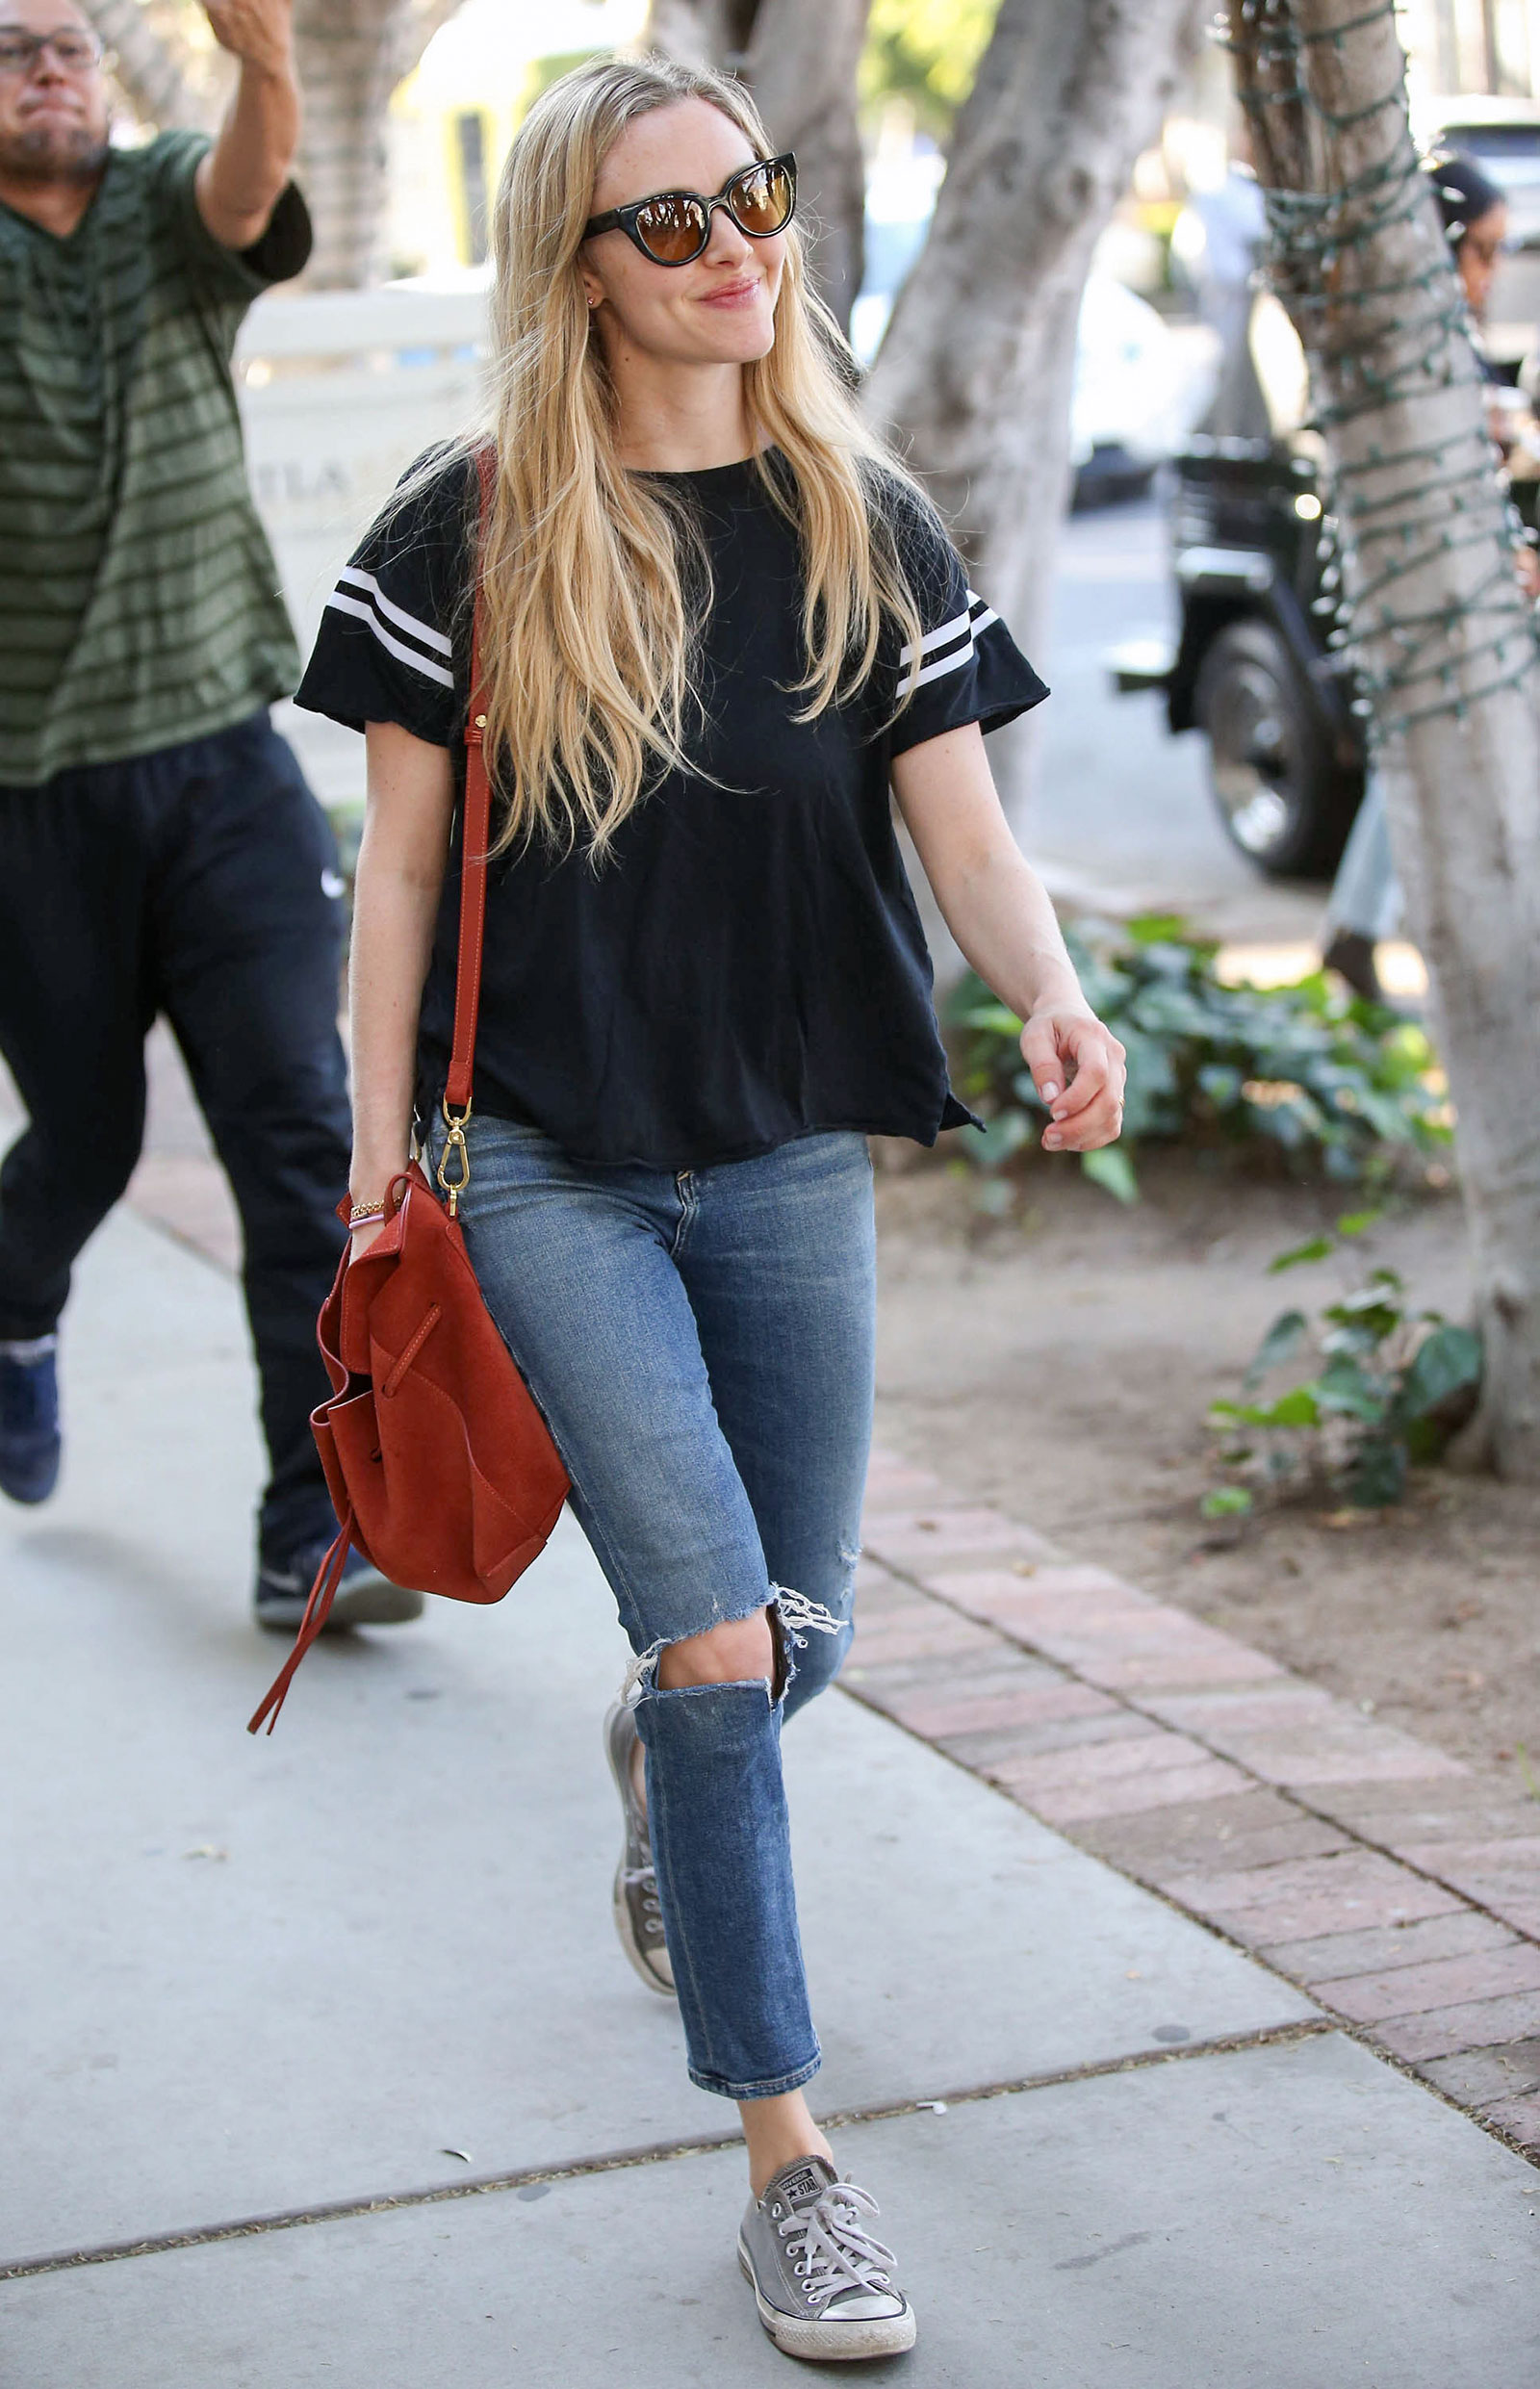 Amanda Seyfriend looks cute and sporty in a varsity stripe tee, ripped jeans and Converse Chuck Taylor All Star sneakers.